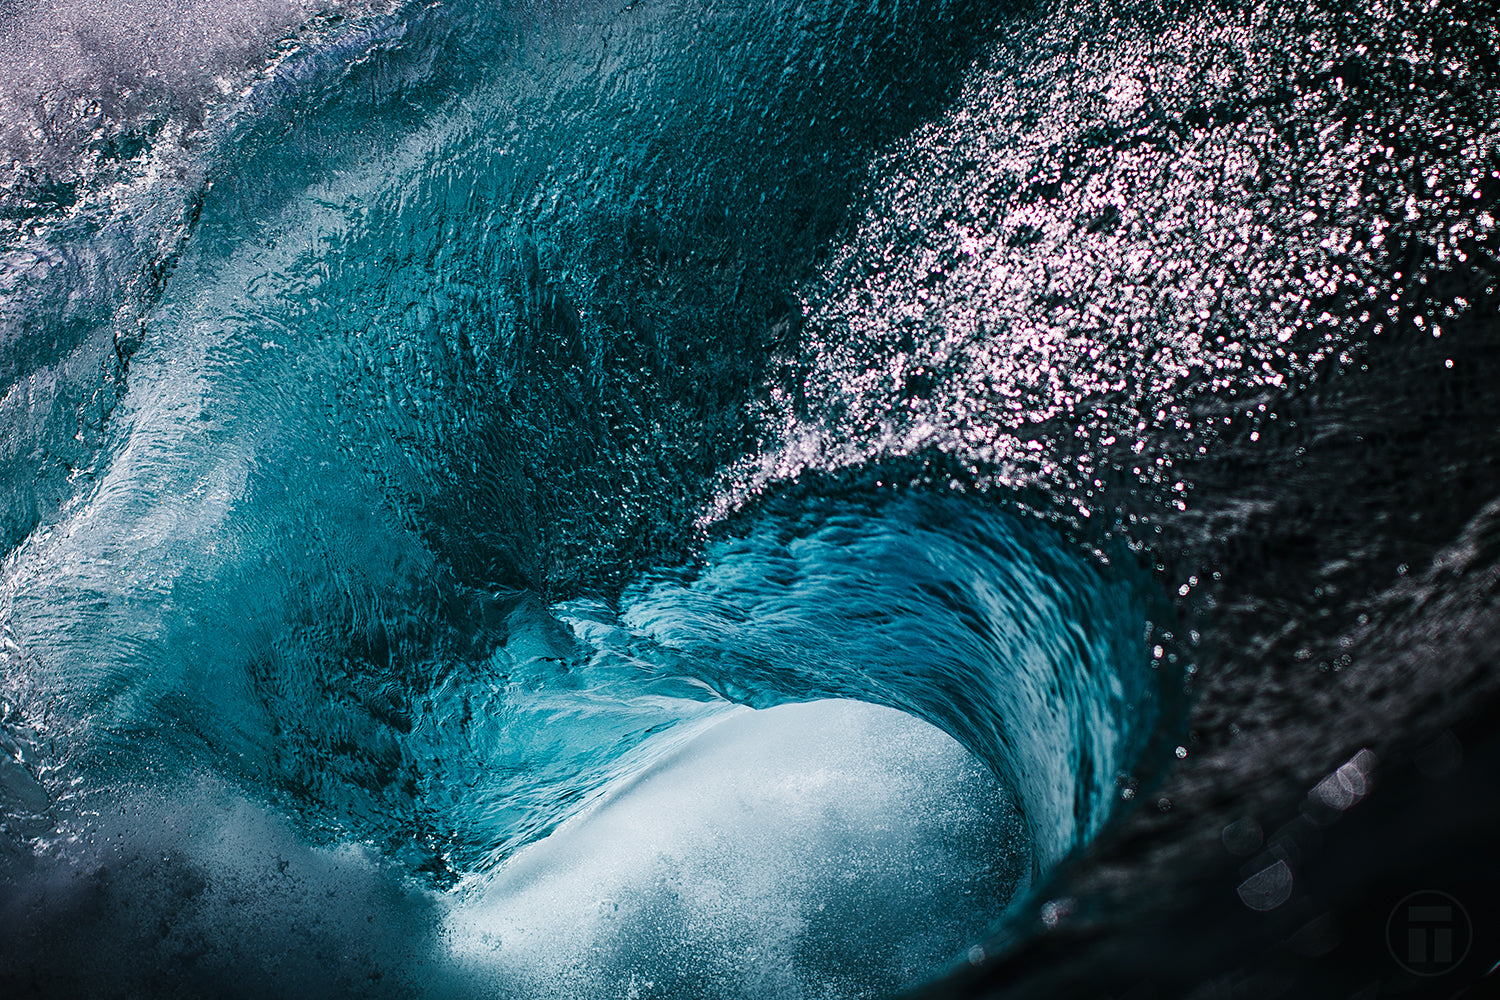 Tight shot of a waves lip with the Canon 50mm f/1.2 by Thurston Photo